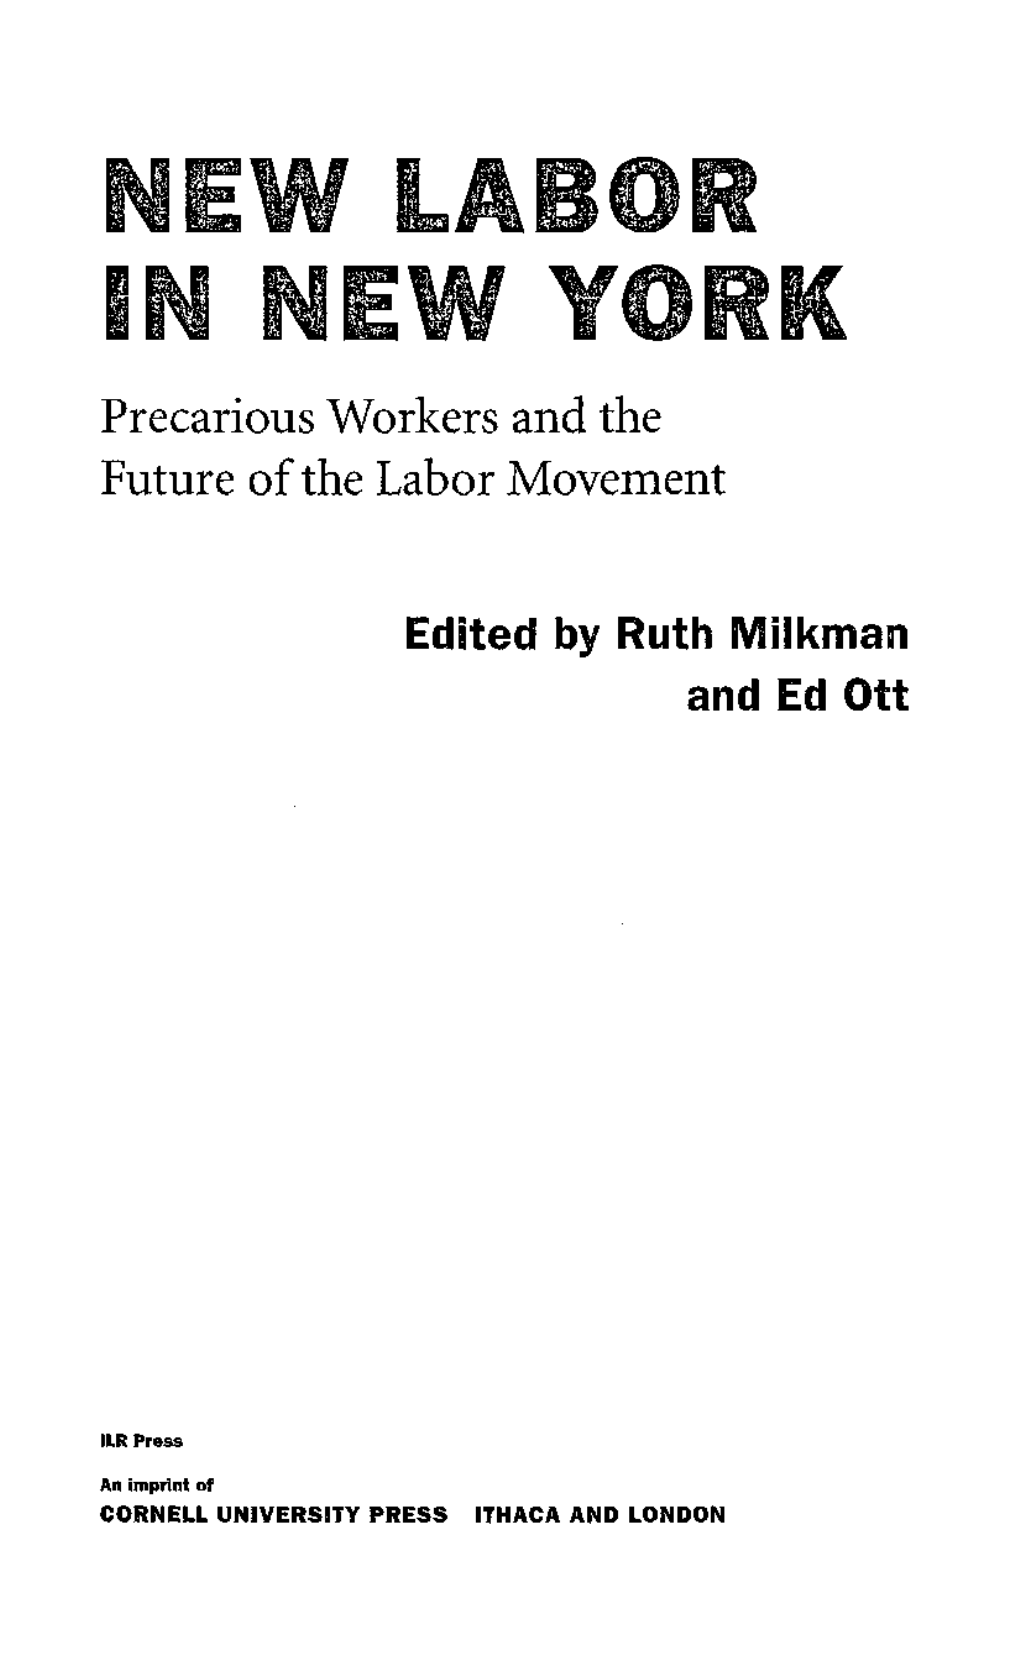 Precarious Workers and the Future of the Labor Movement